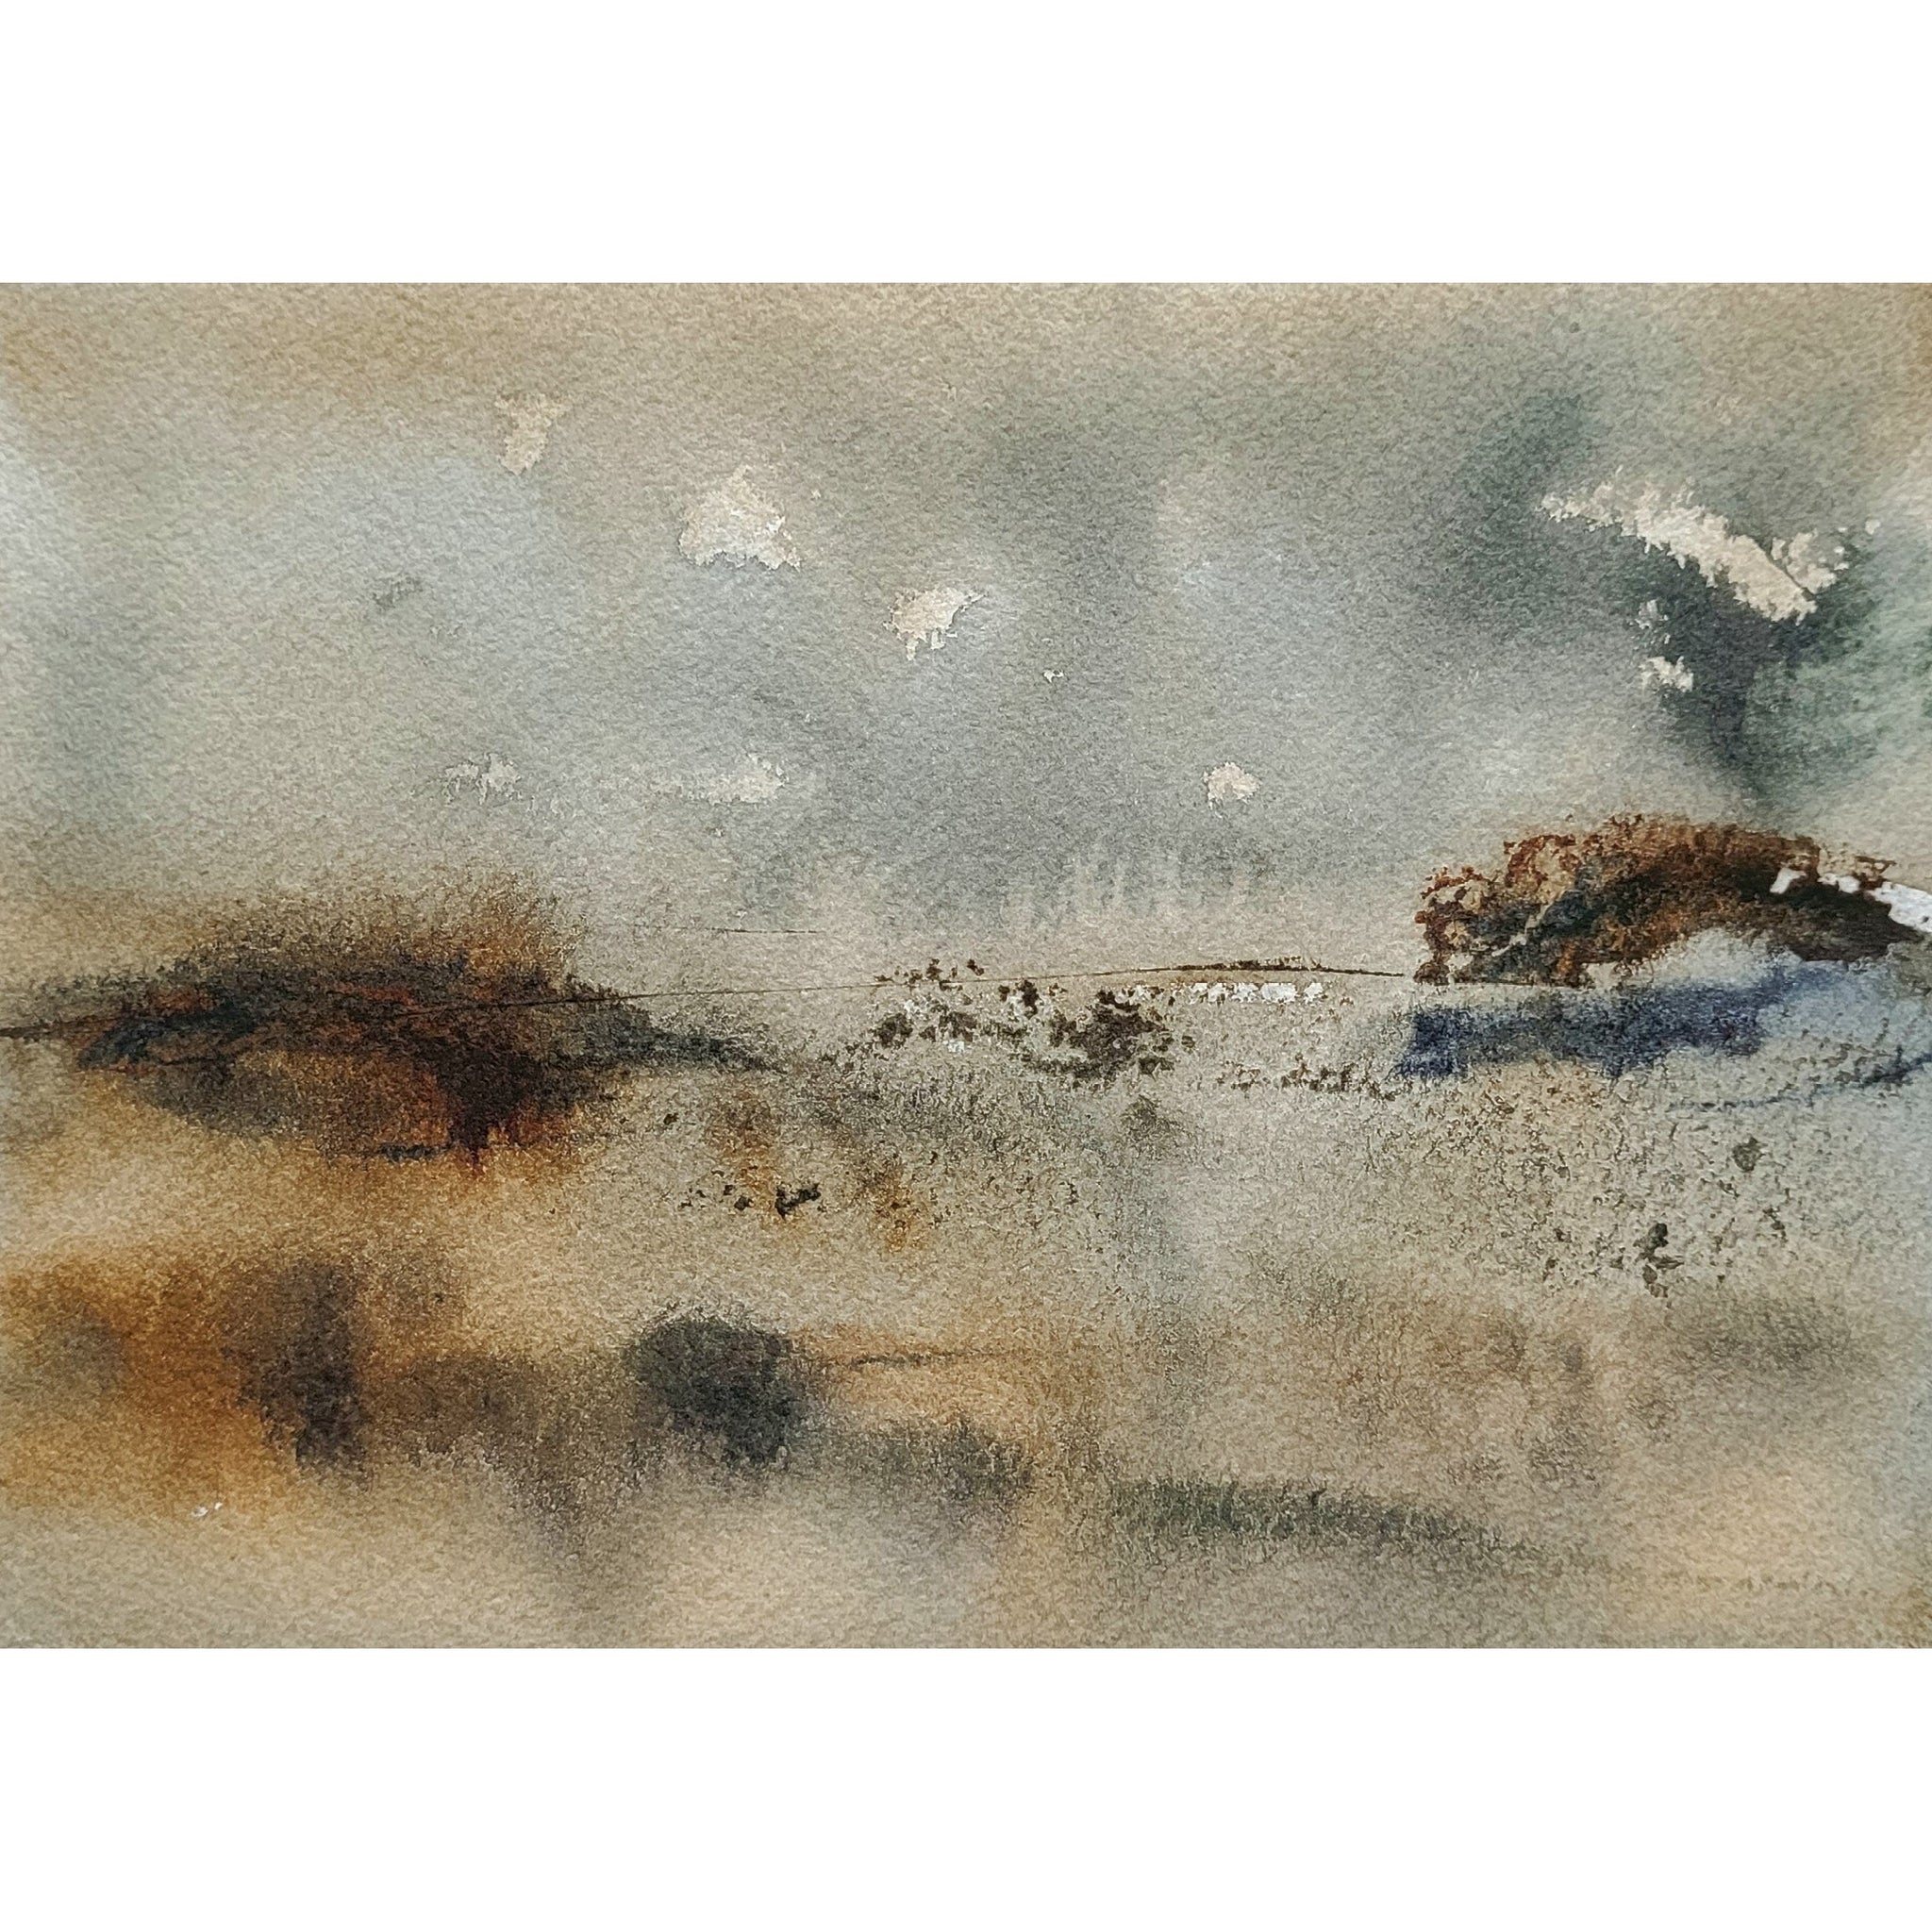 Rust Brown & Blue Abstract Landscape Painting Original Watercolor Art 5 x 7 inch - Warm Wilderness